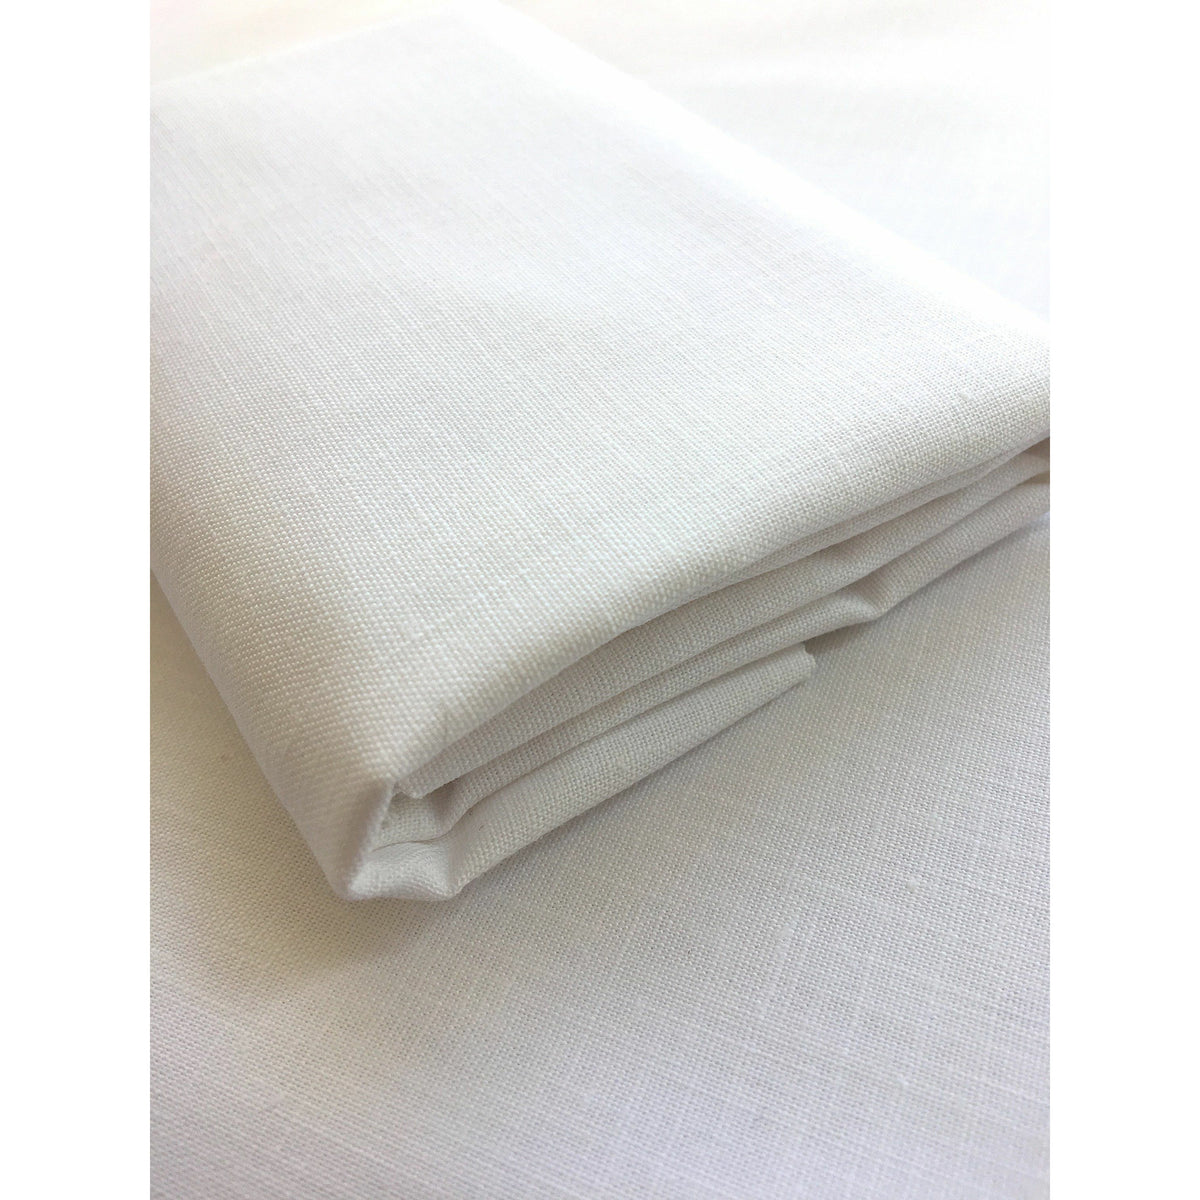 White Weavers Cloth *Arrived!* - Punch Needle Supplies NZ